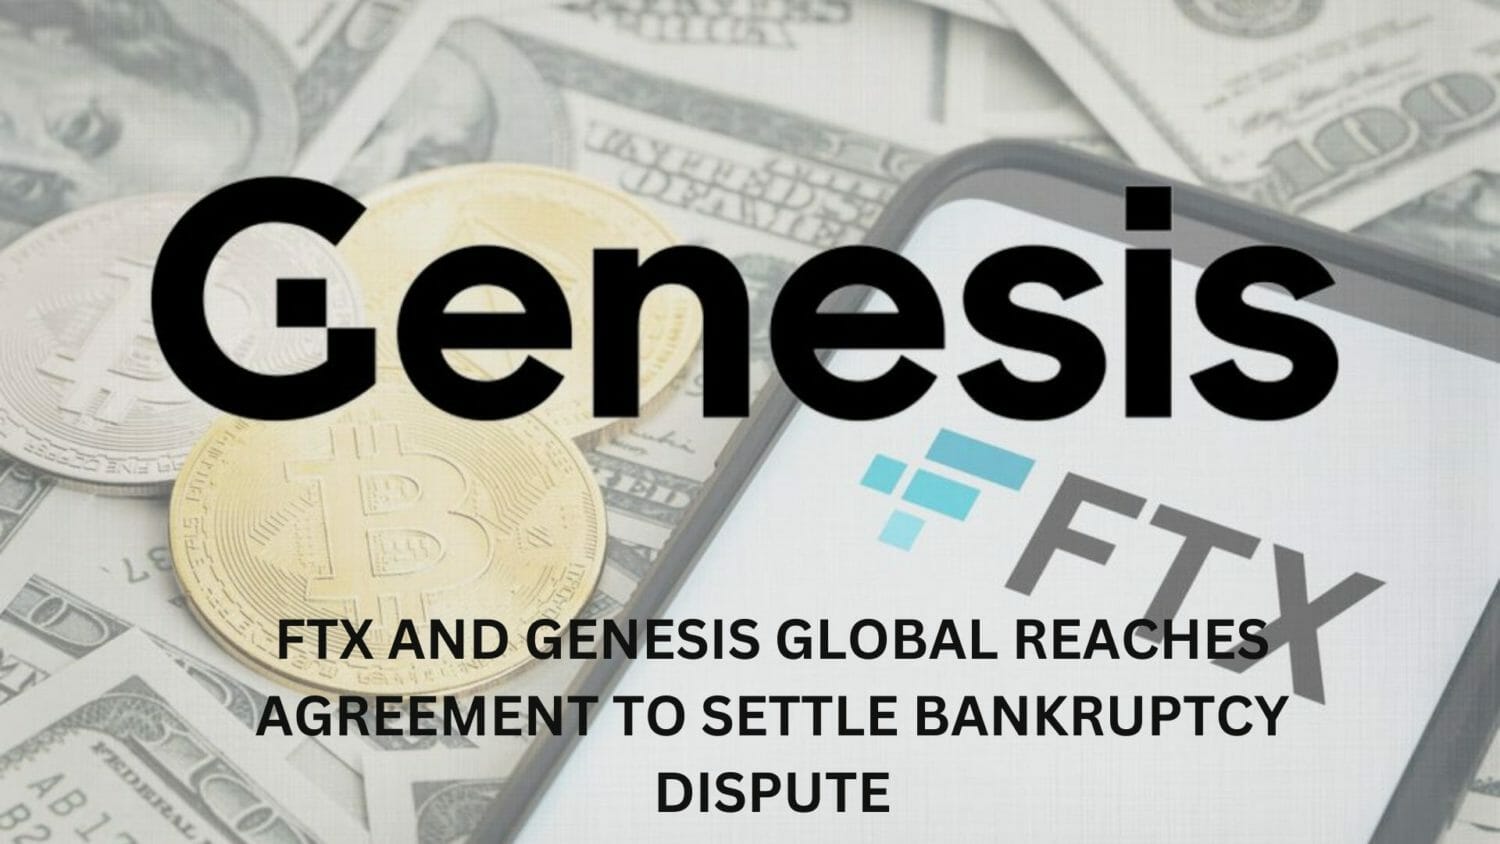 Ftx And Genesis Global Reaches Agreement To Settle Bankruptcy Dispute